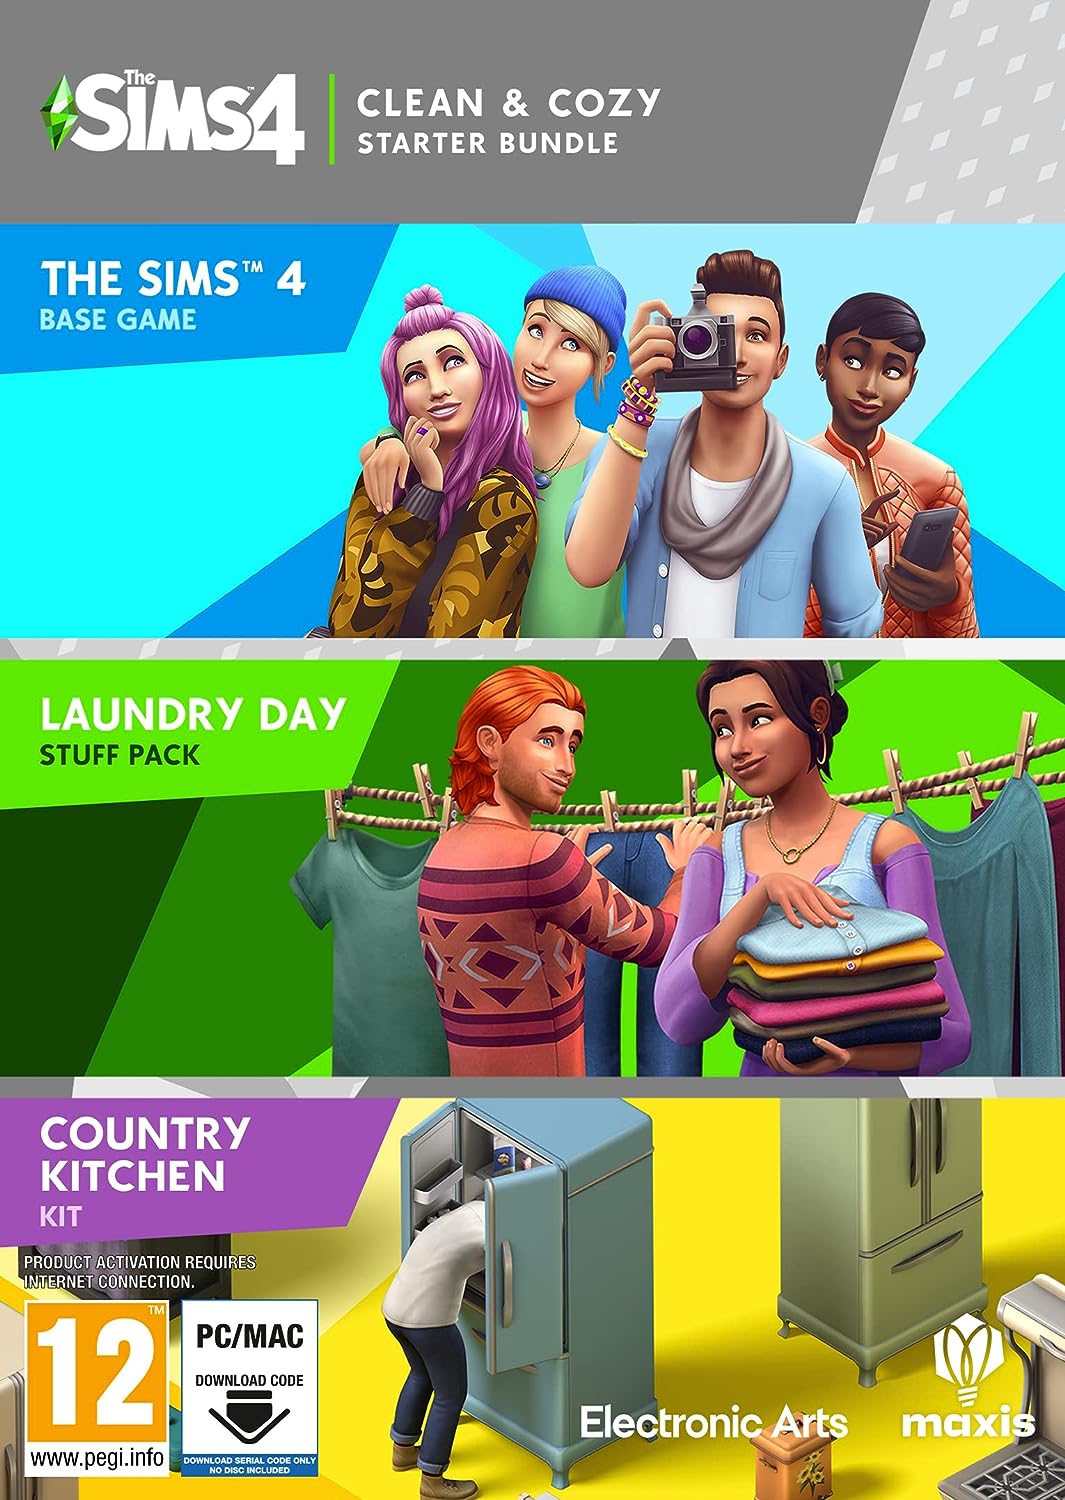 The Sims 4: Clean & Cozy Starter Bundle